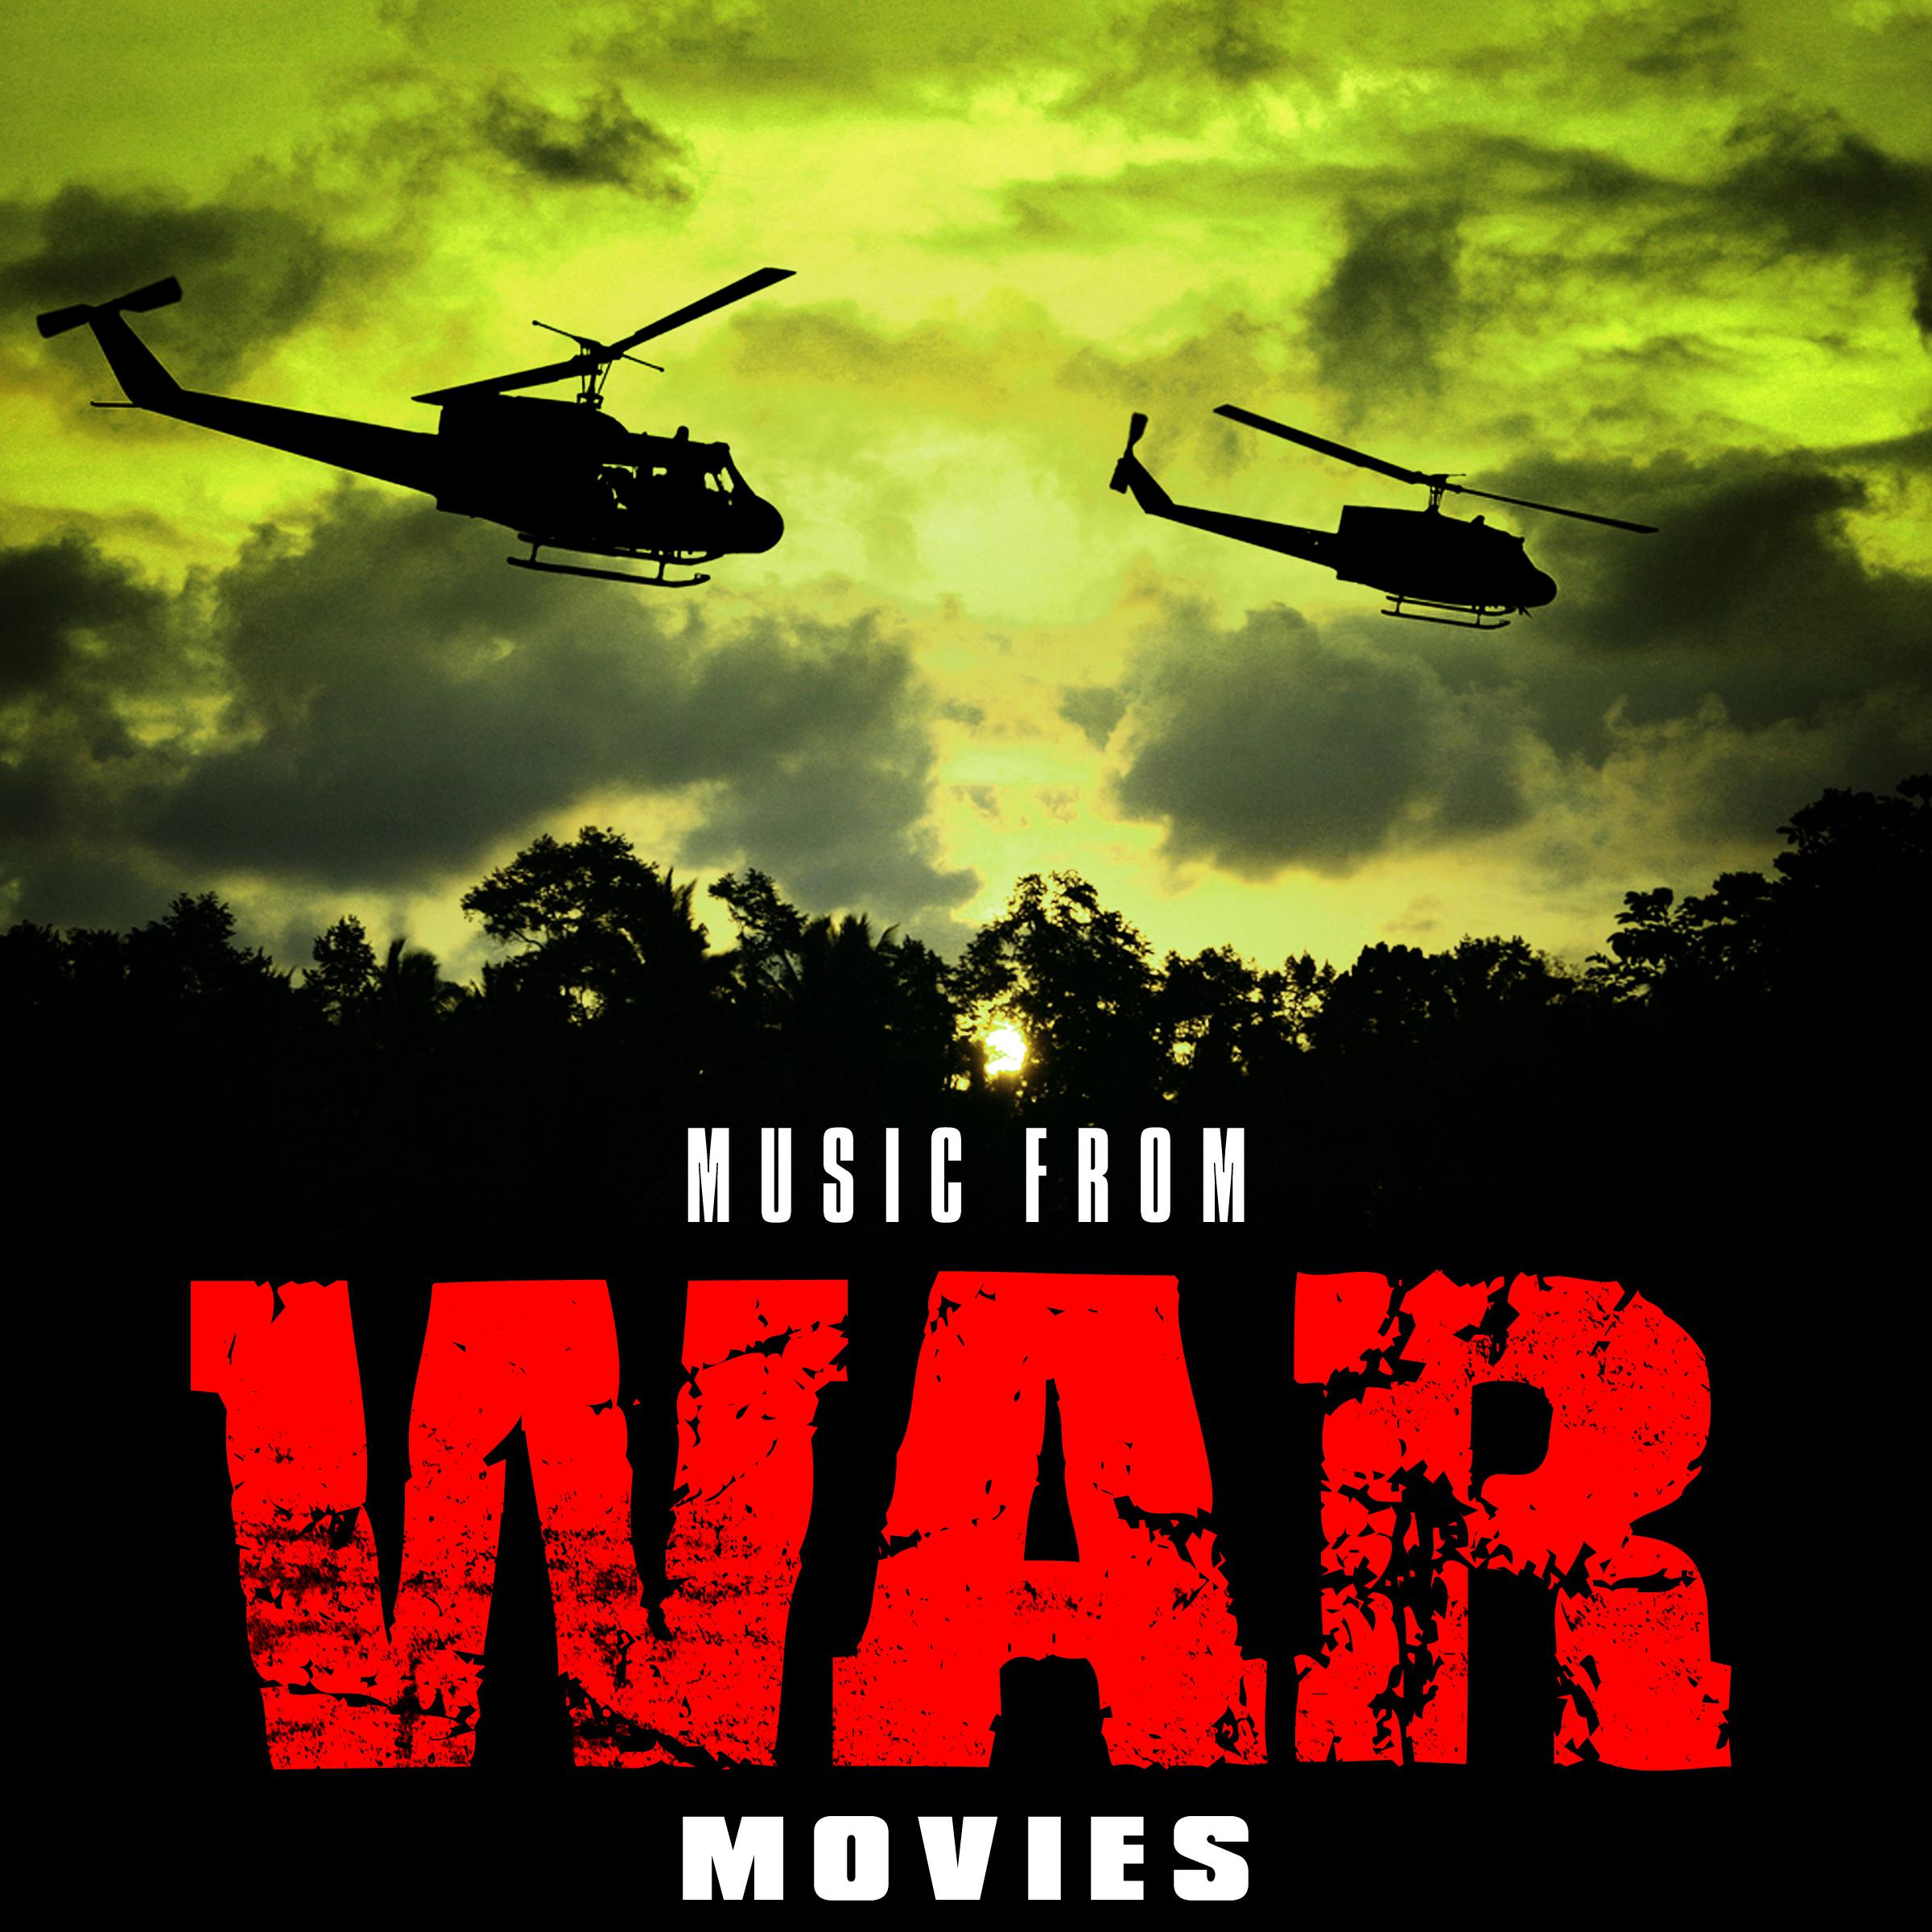 Music from War Movies